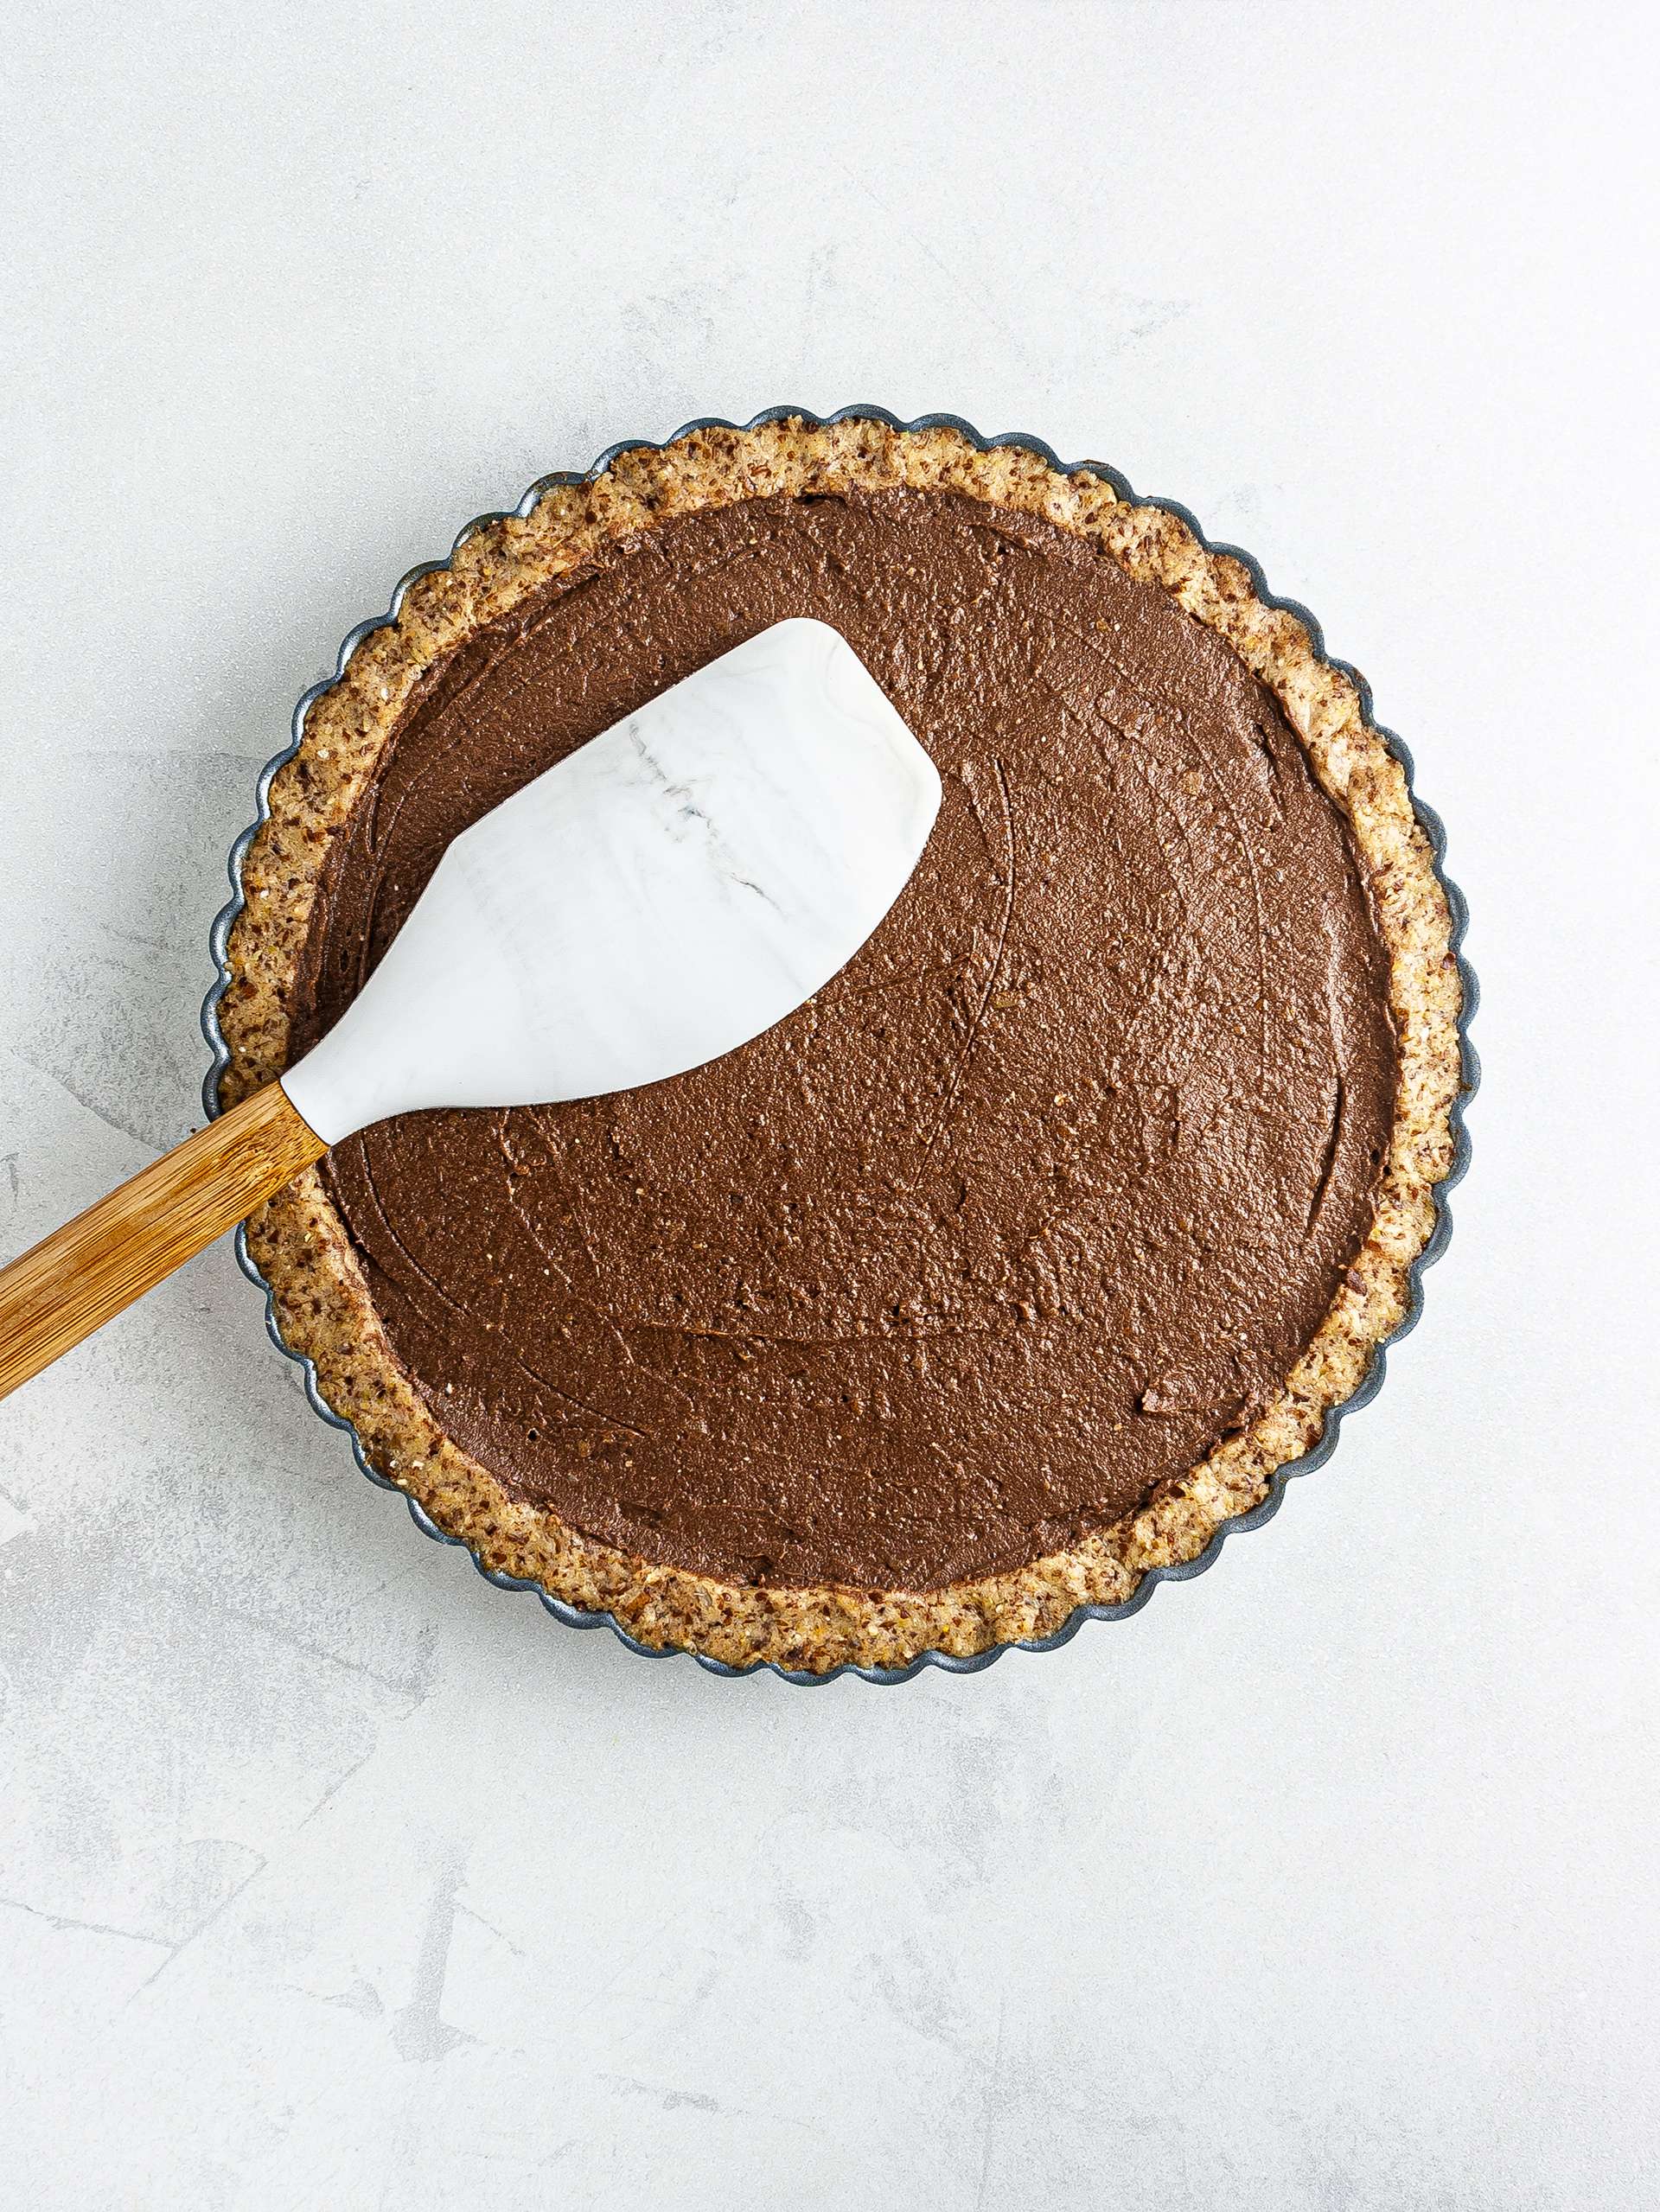 Pie crust filled with the chocolate cream